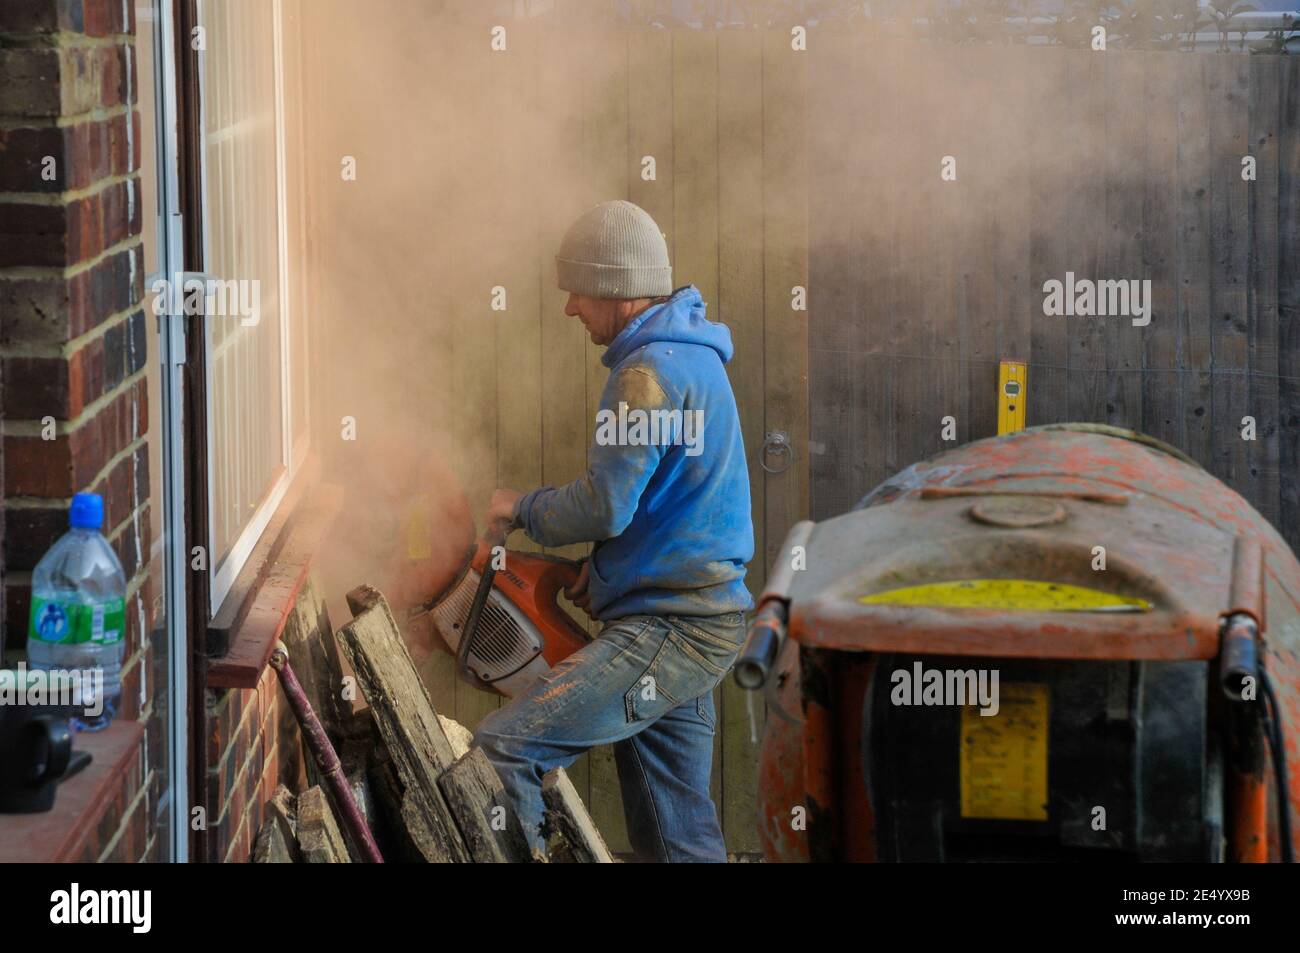 Building worker cutting through a brick wall with petrol masonry cutter and without protective gear. Stock Photo